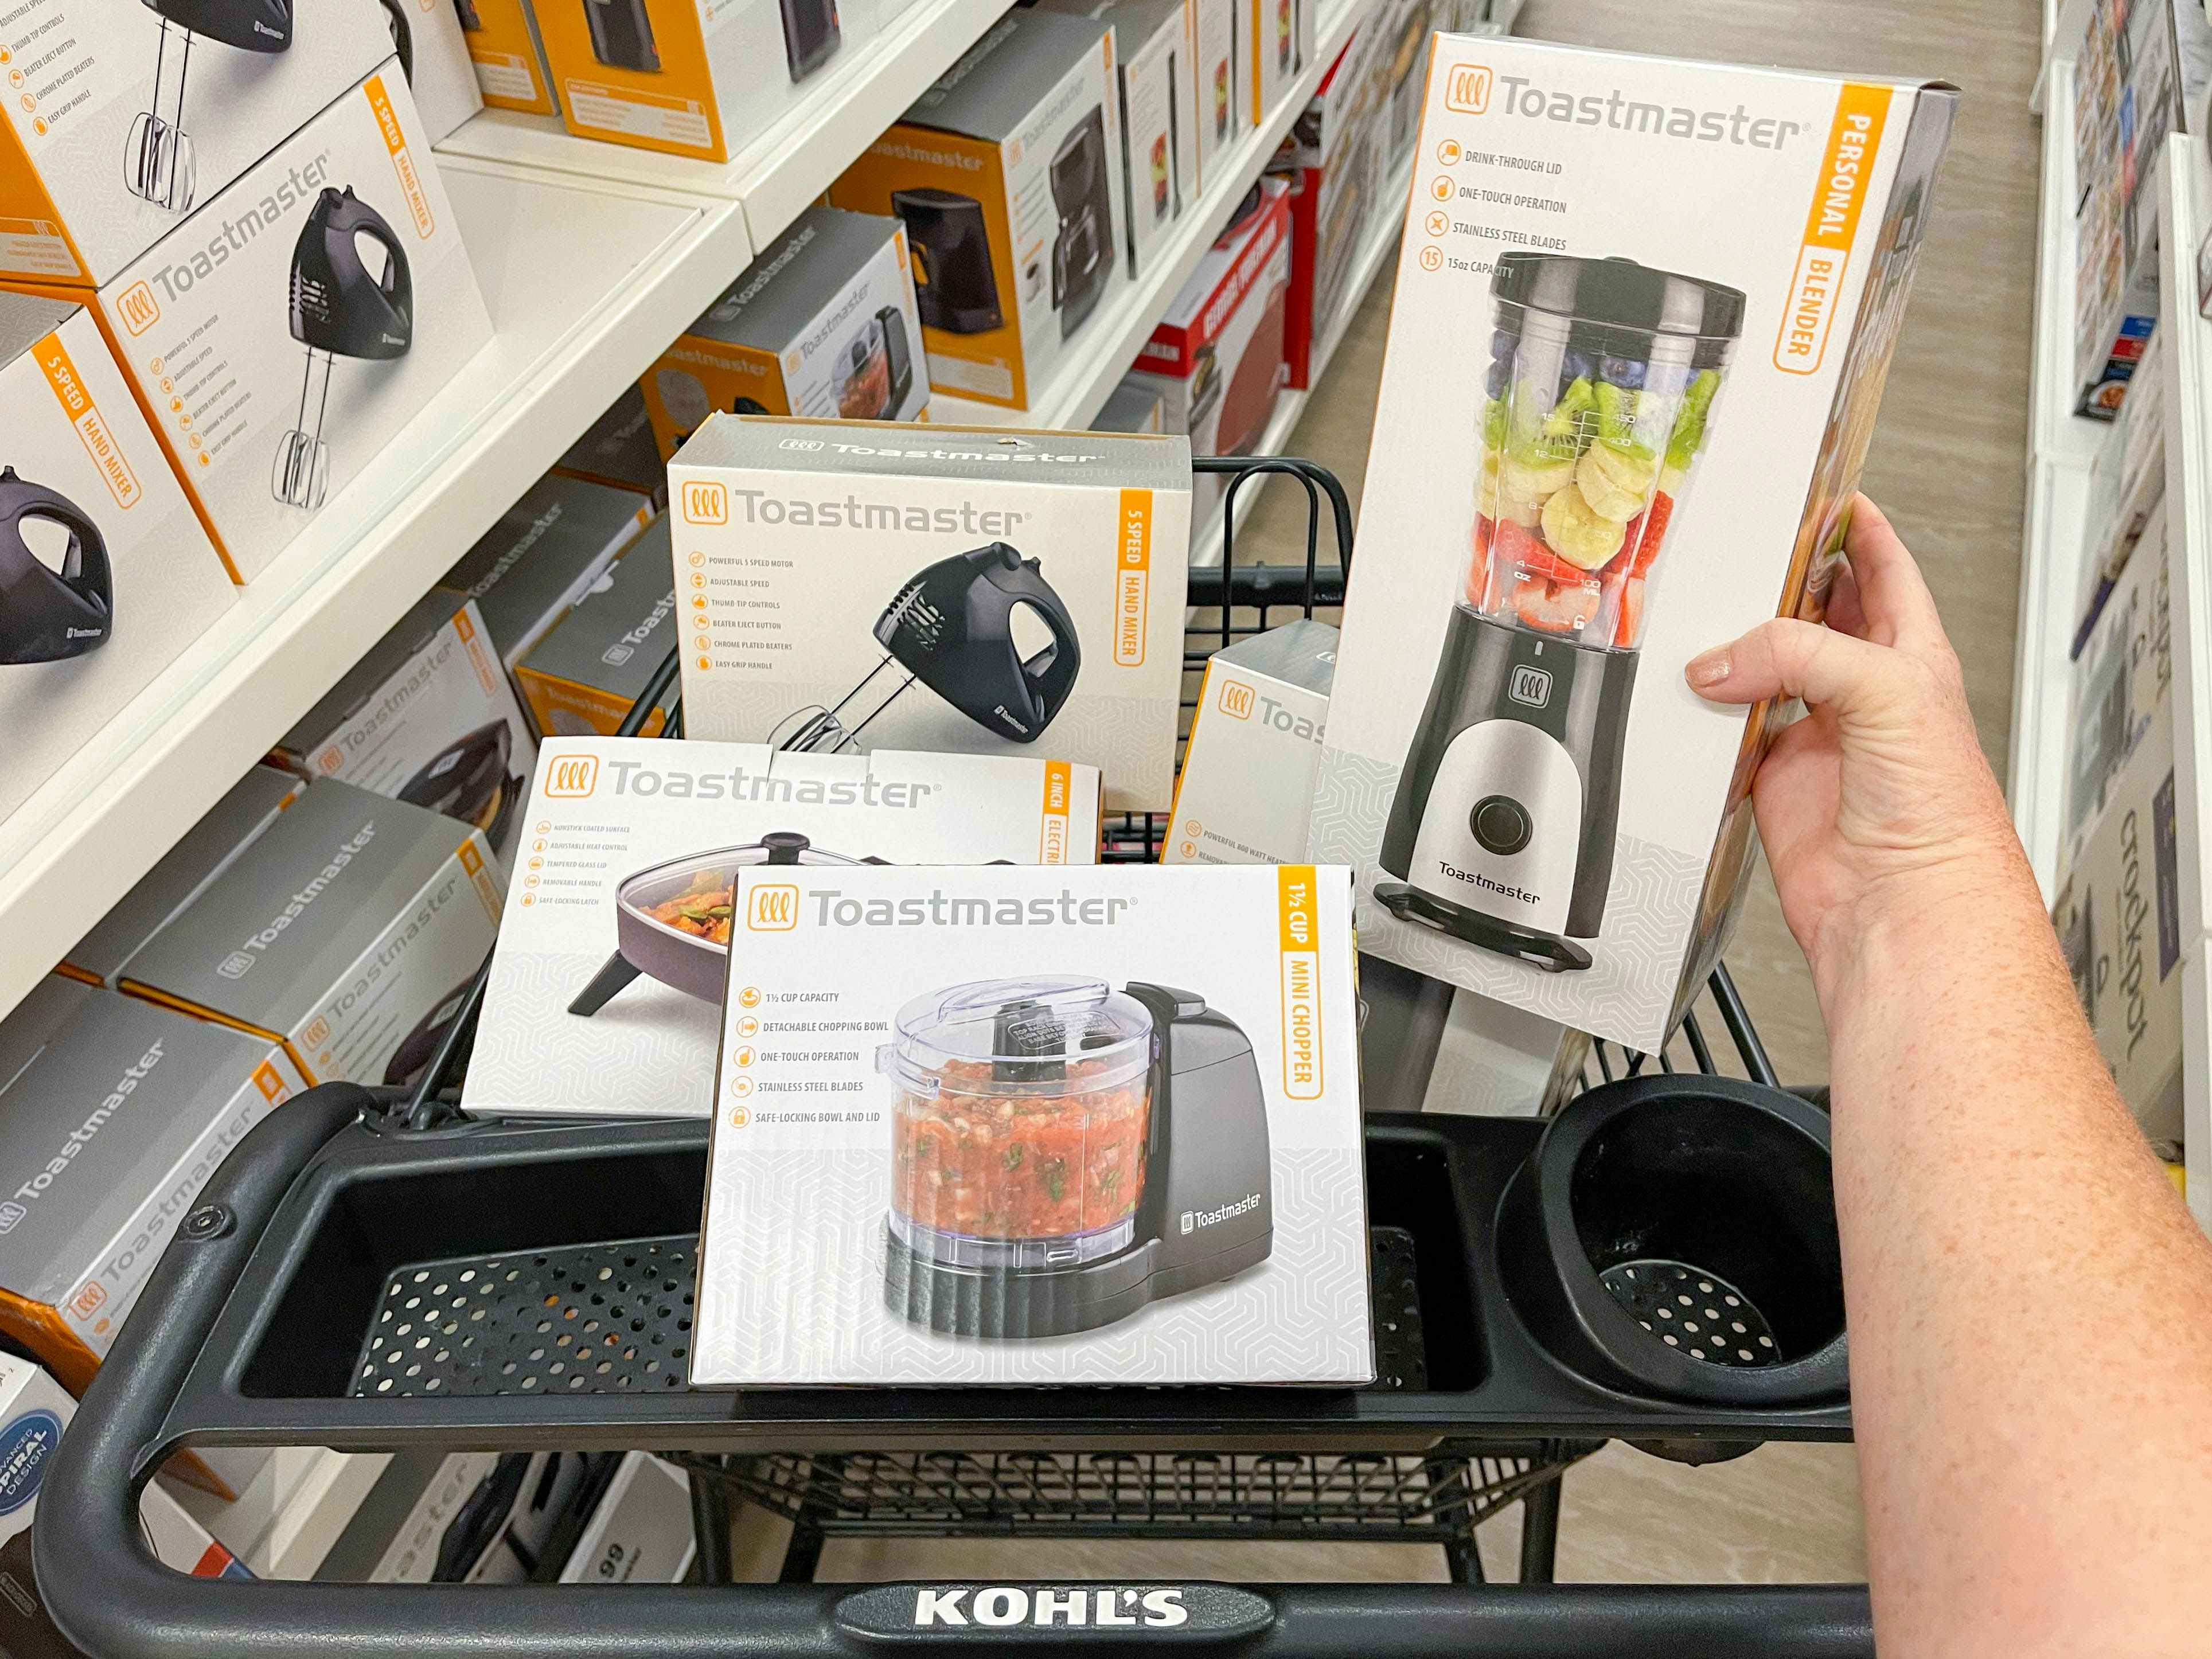 A person's hand holding a Toastmaster blender above more small Toastmaster appliances in a Kohl's shopping cart.